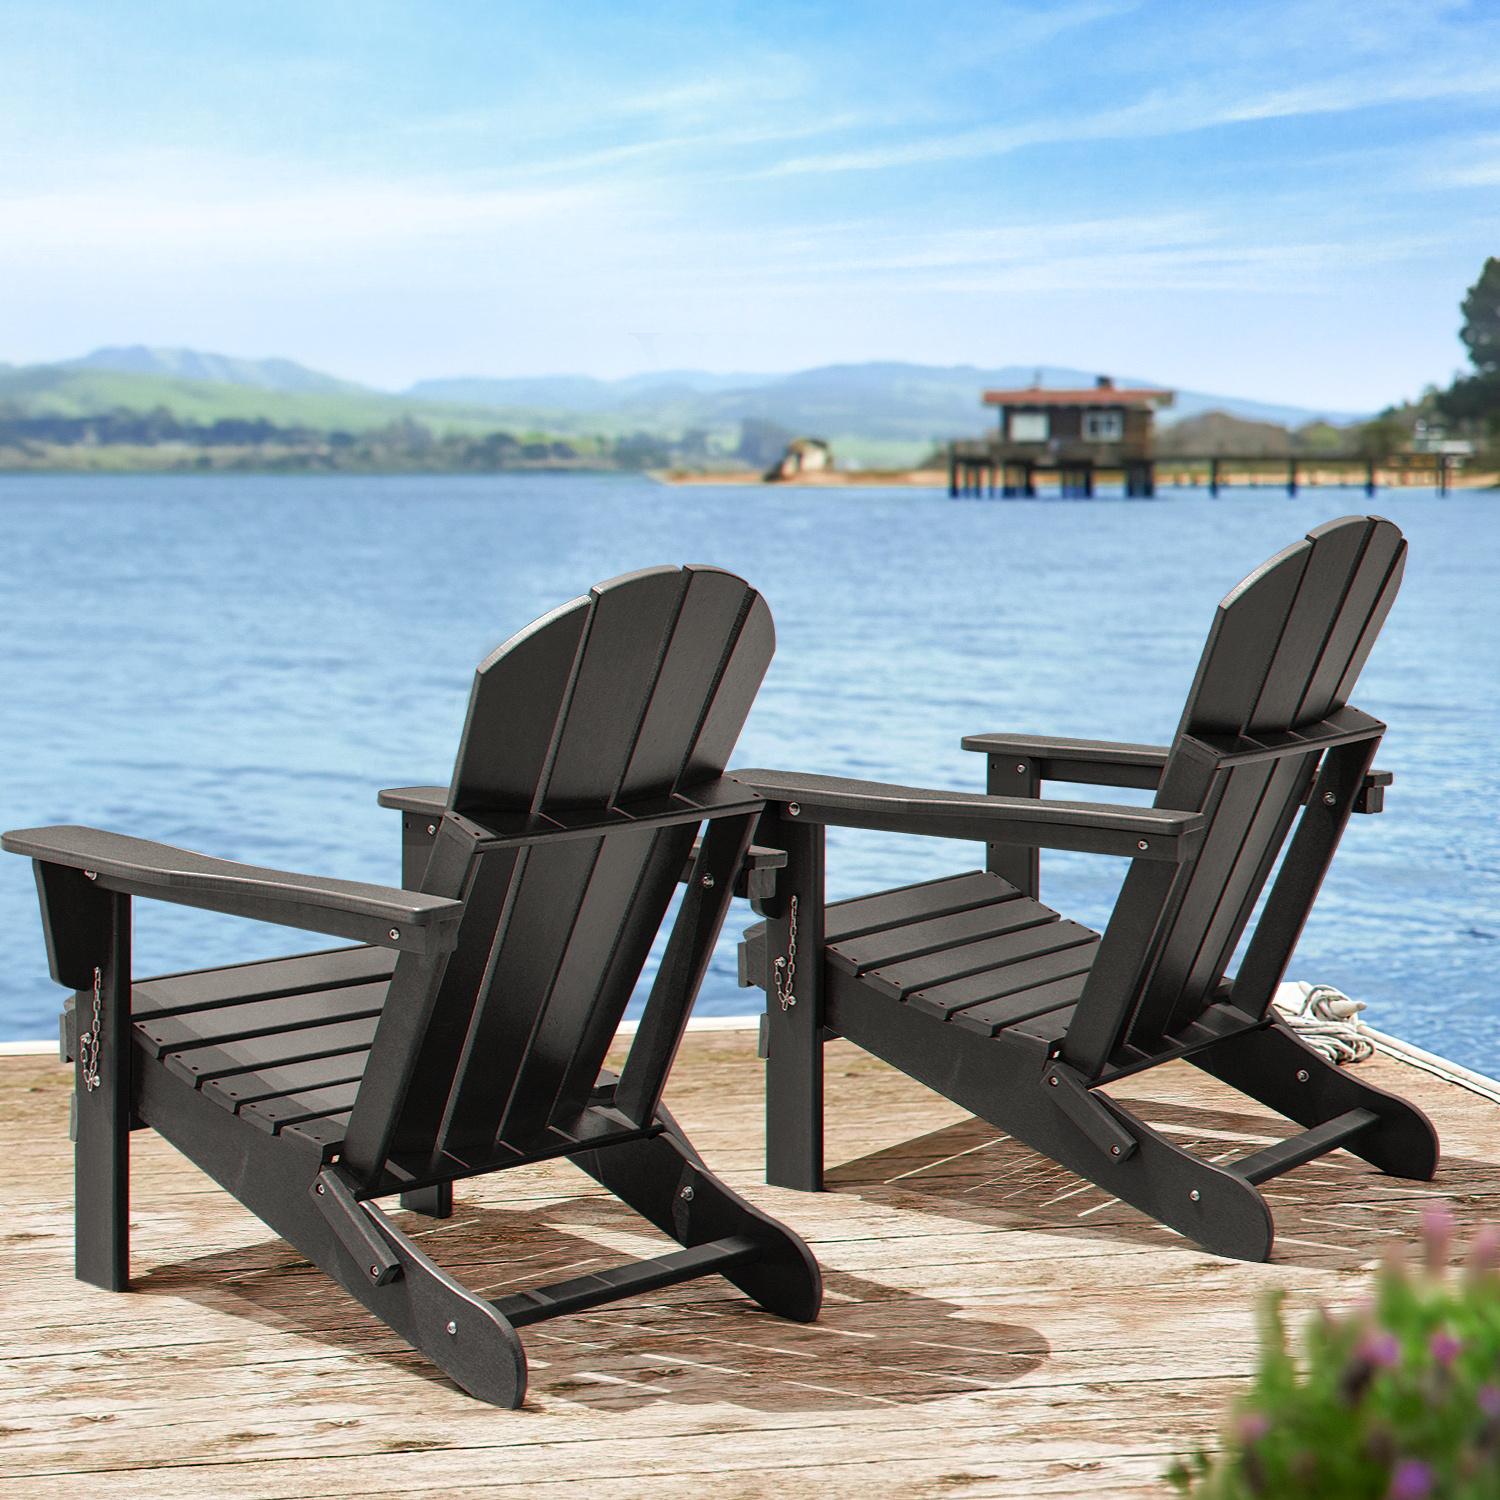 Lacoo Folding Adirondack Chair All Weather Resistant Resin Outdoor Patio Chair, Black - image 2 of 7